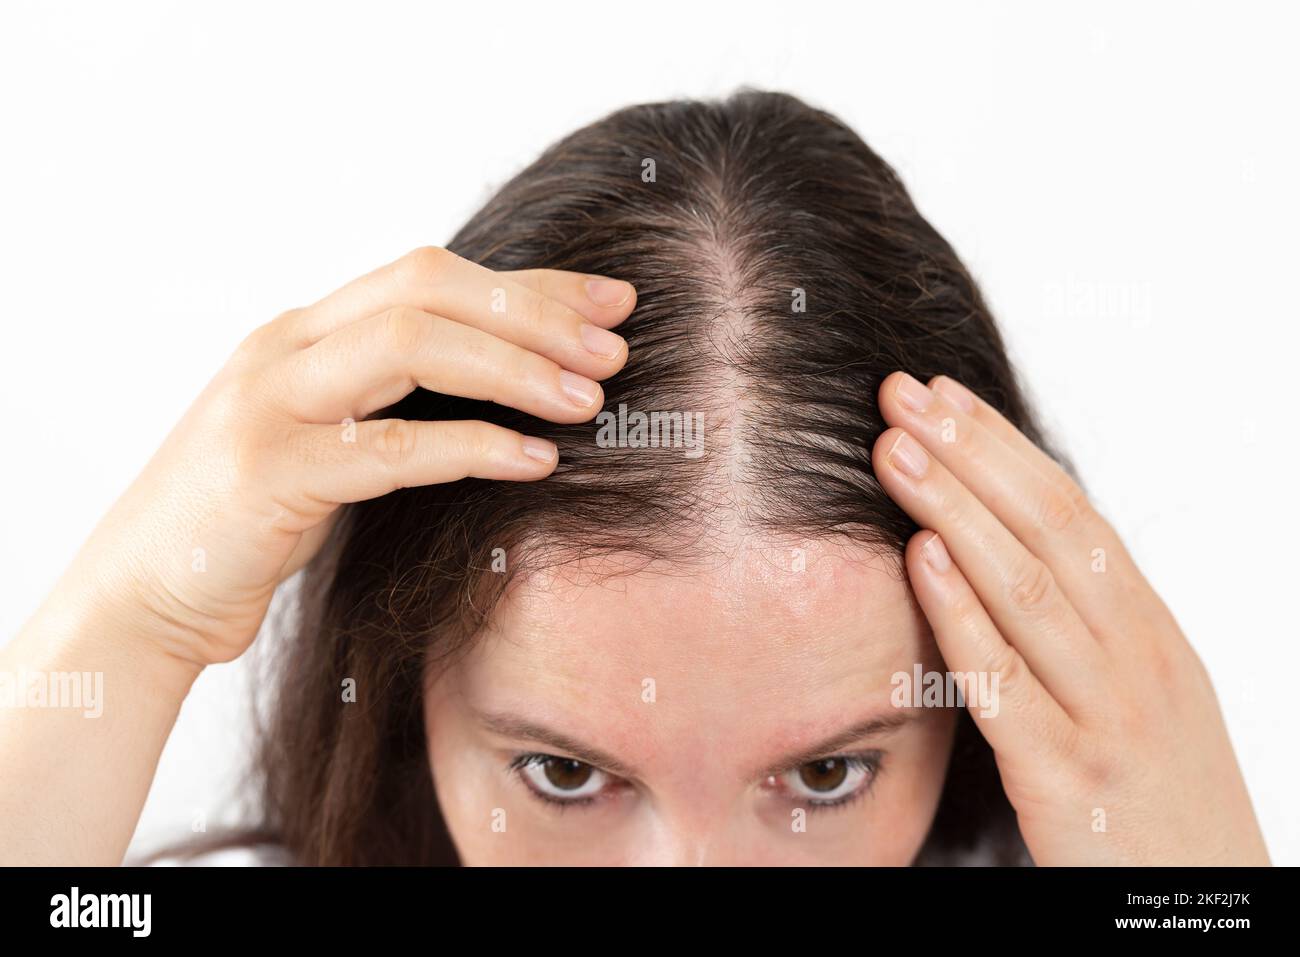 Close-up of woman controls hair loss and little volume with fine hair against white background Stock Photo